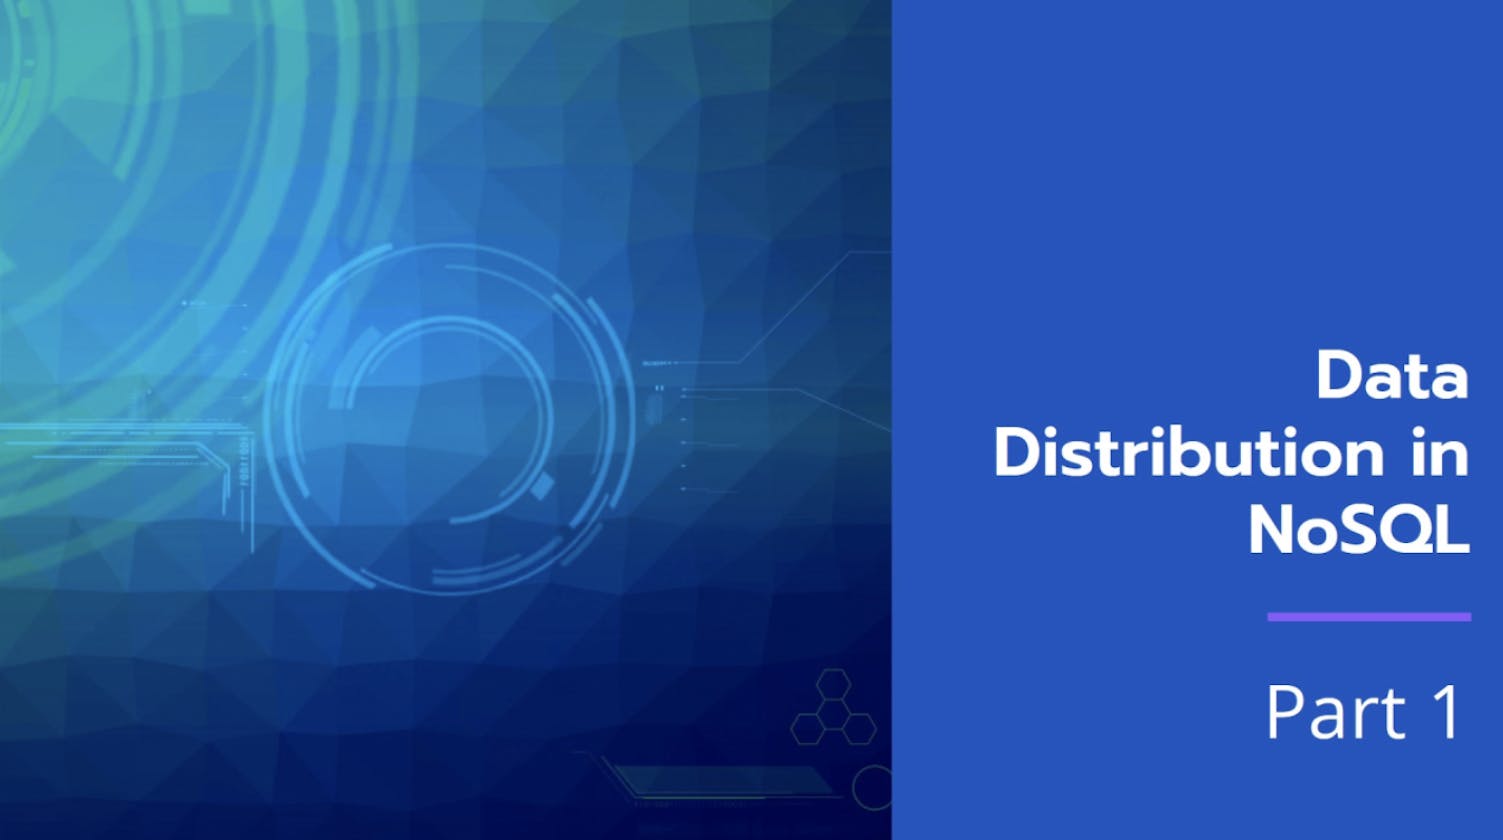 Distribution of data in NoSQL Databases - Part 1